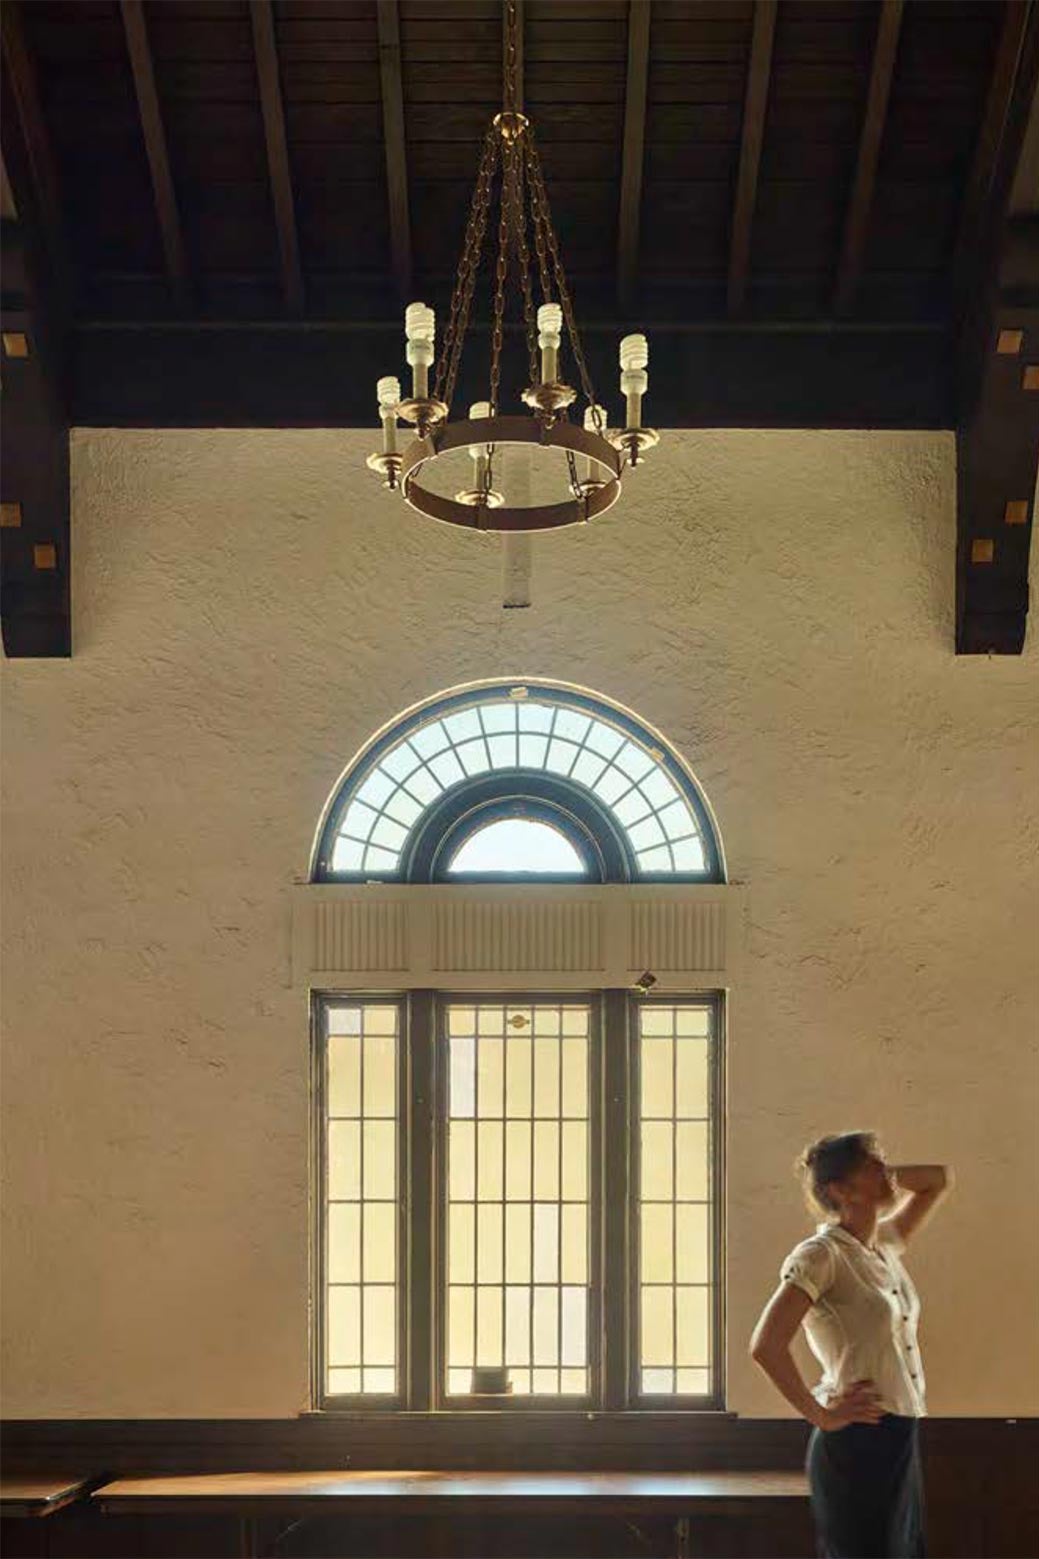 A woman holds her hand to her head and looks up at the room while standing beside a large window and below a chandelier.